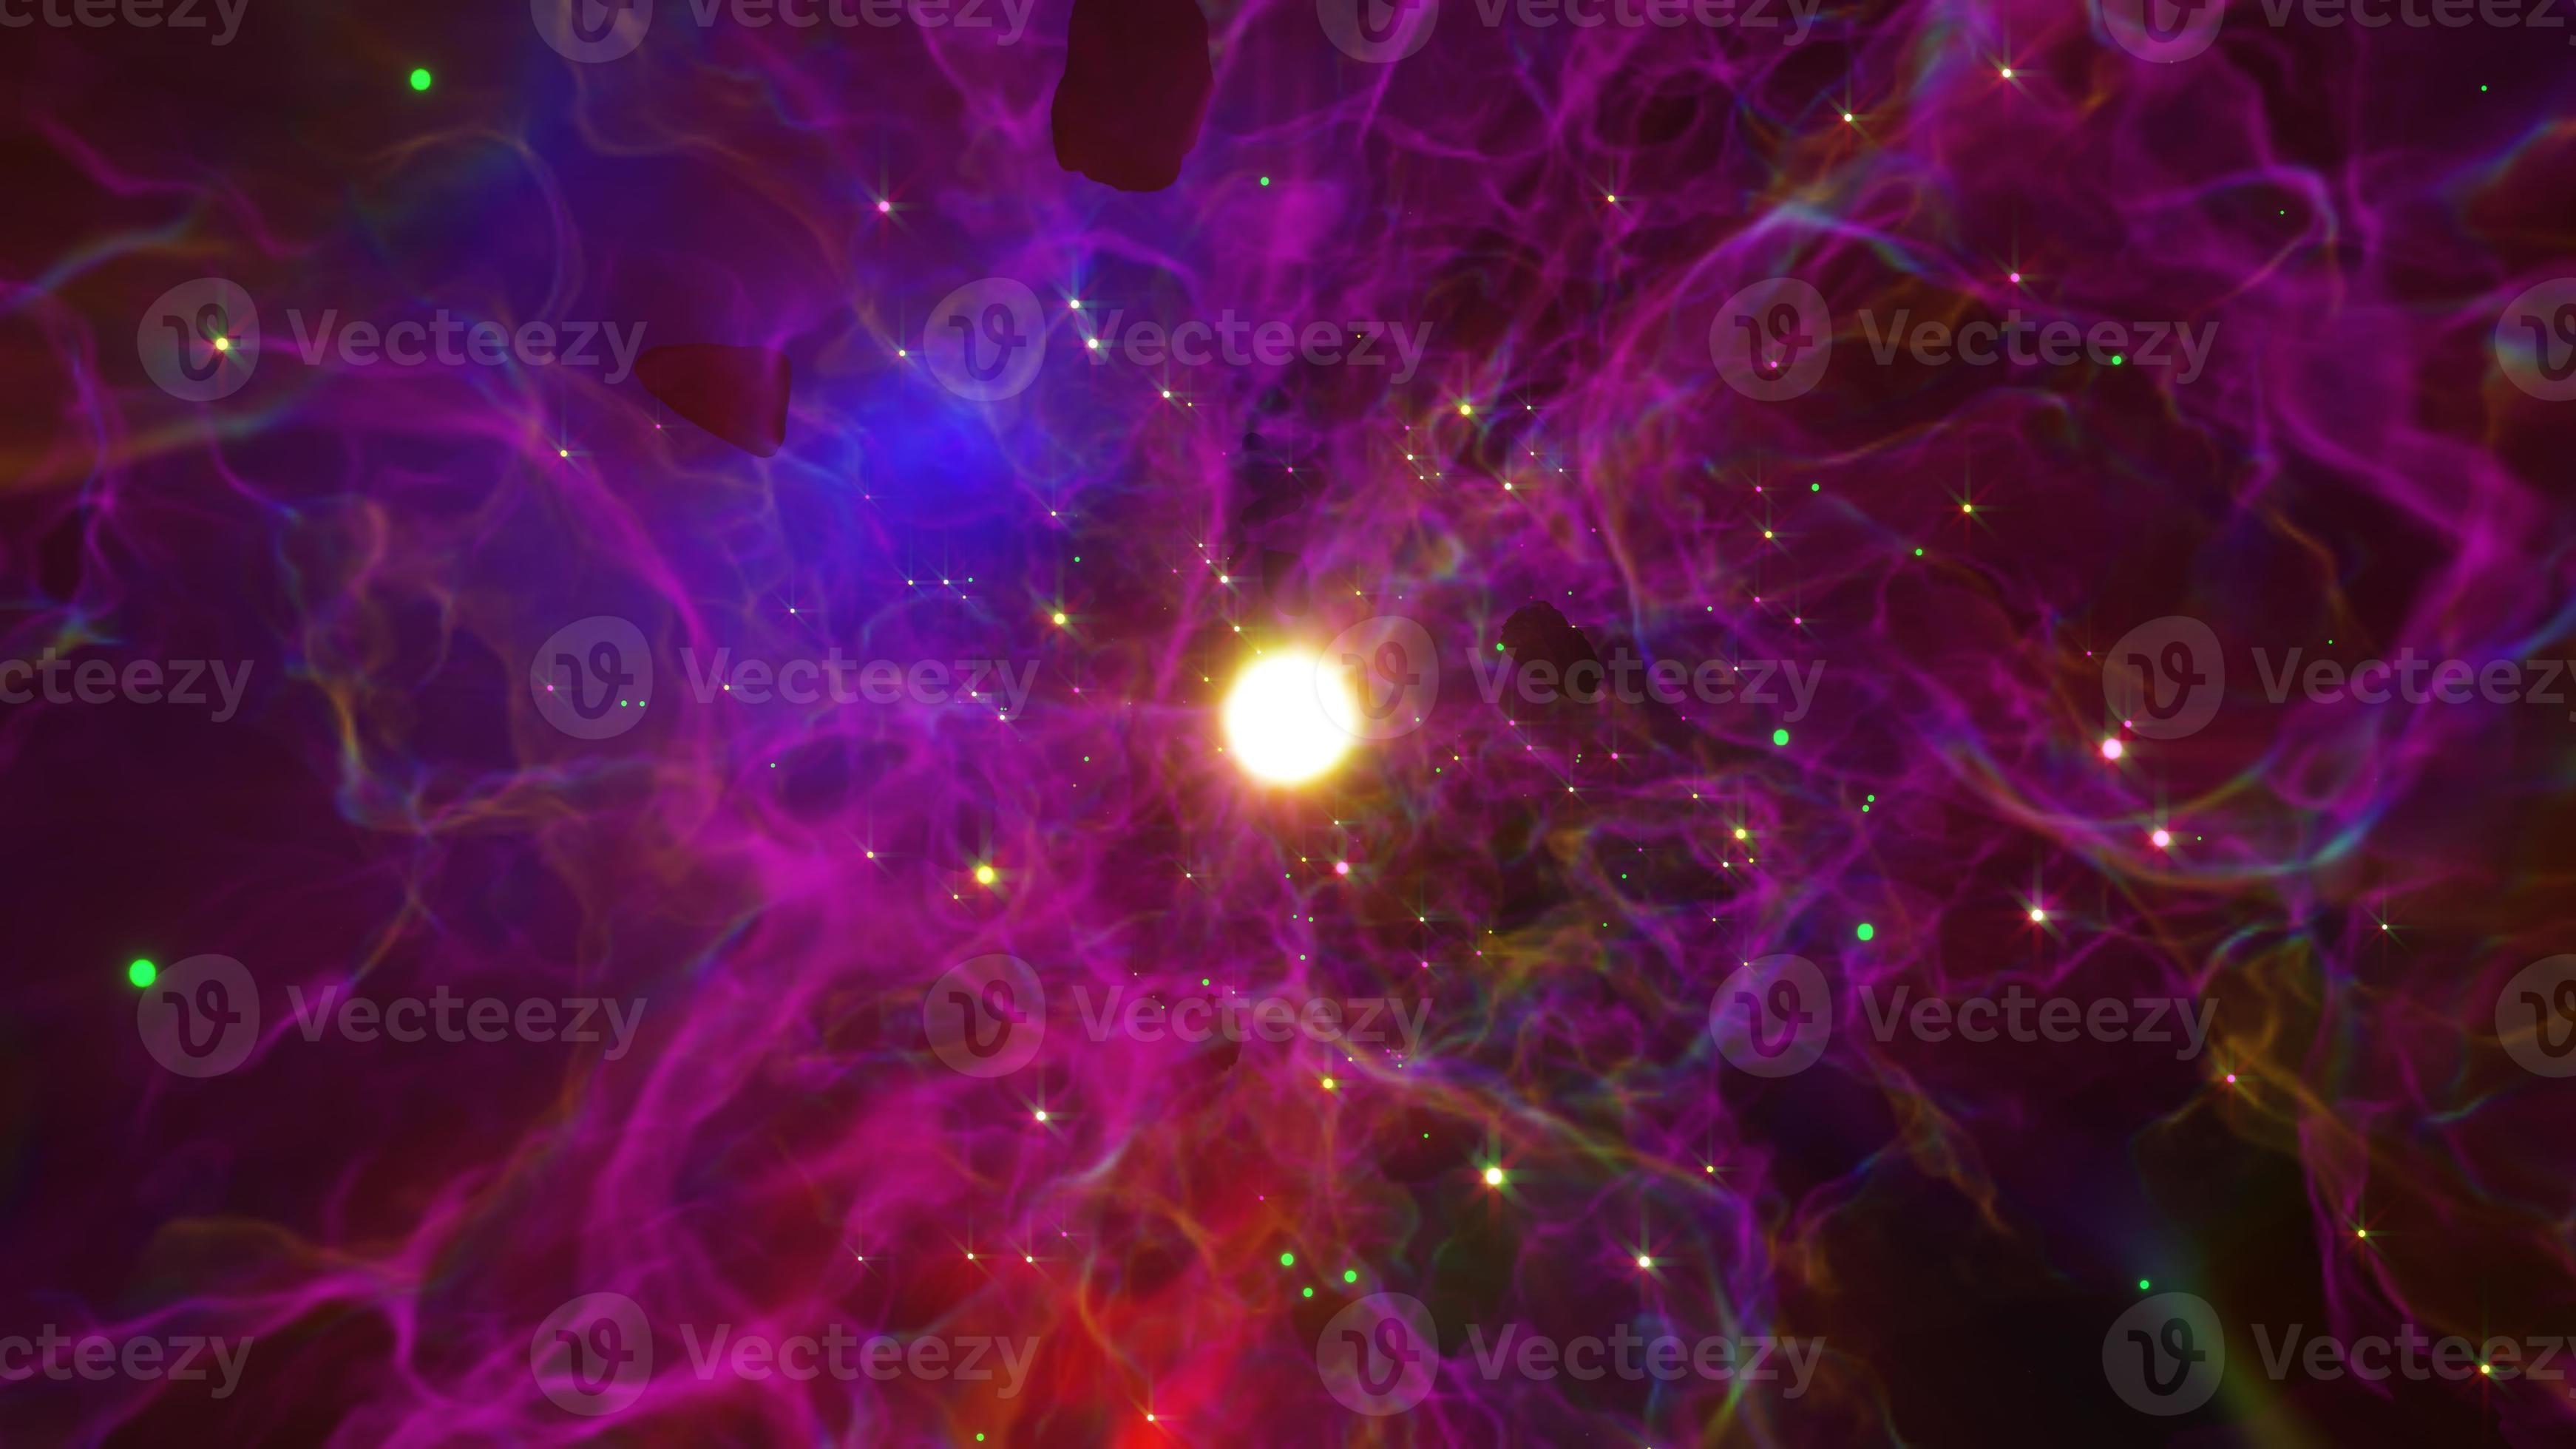 Multiverse 4K wallpapers for your desktop or mobile screen free and easy to  download